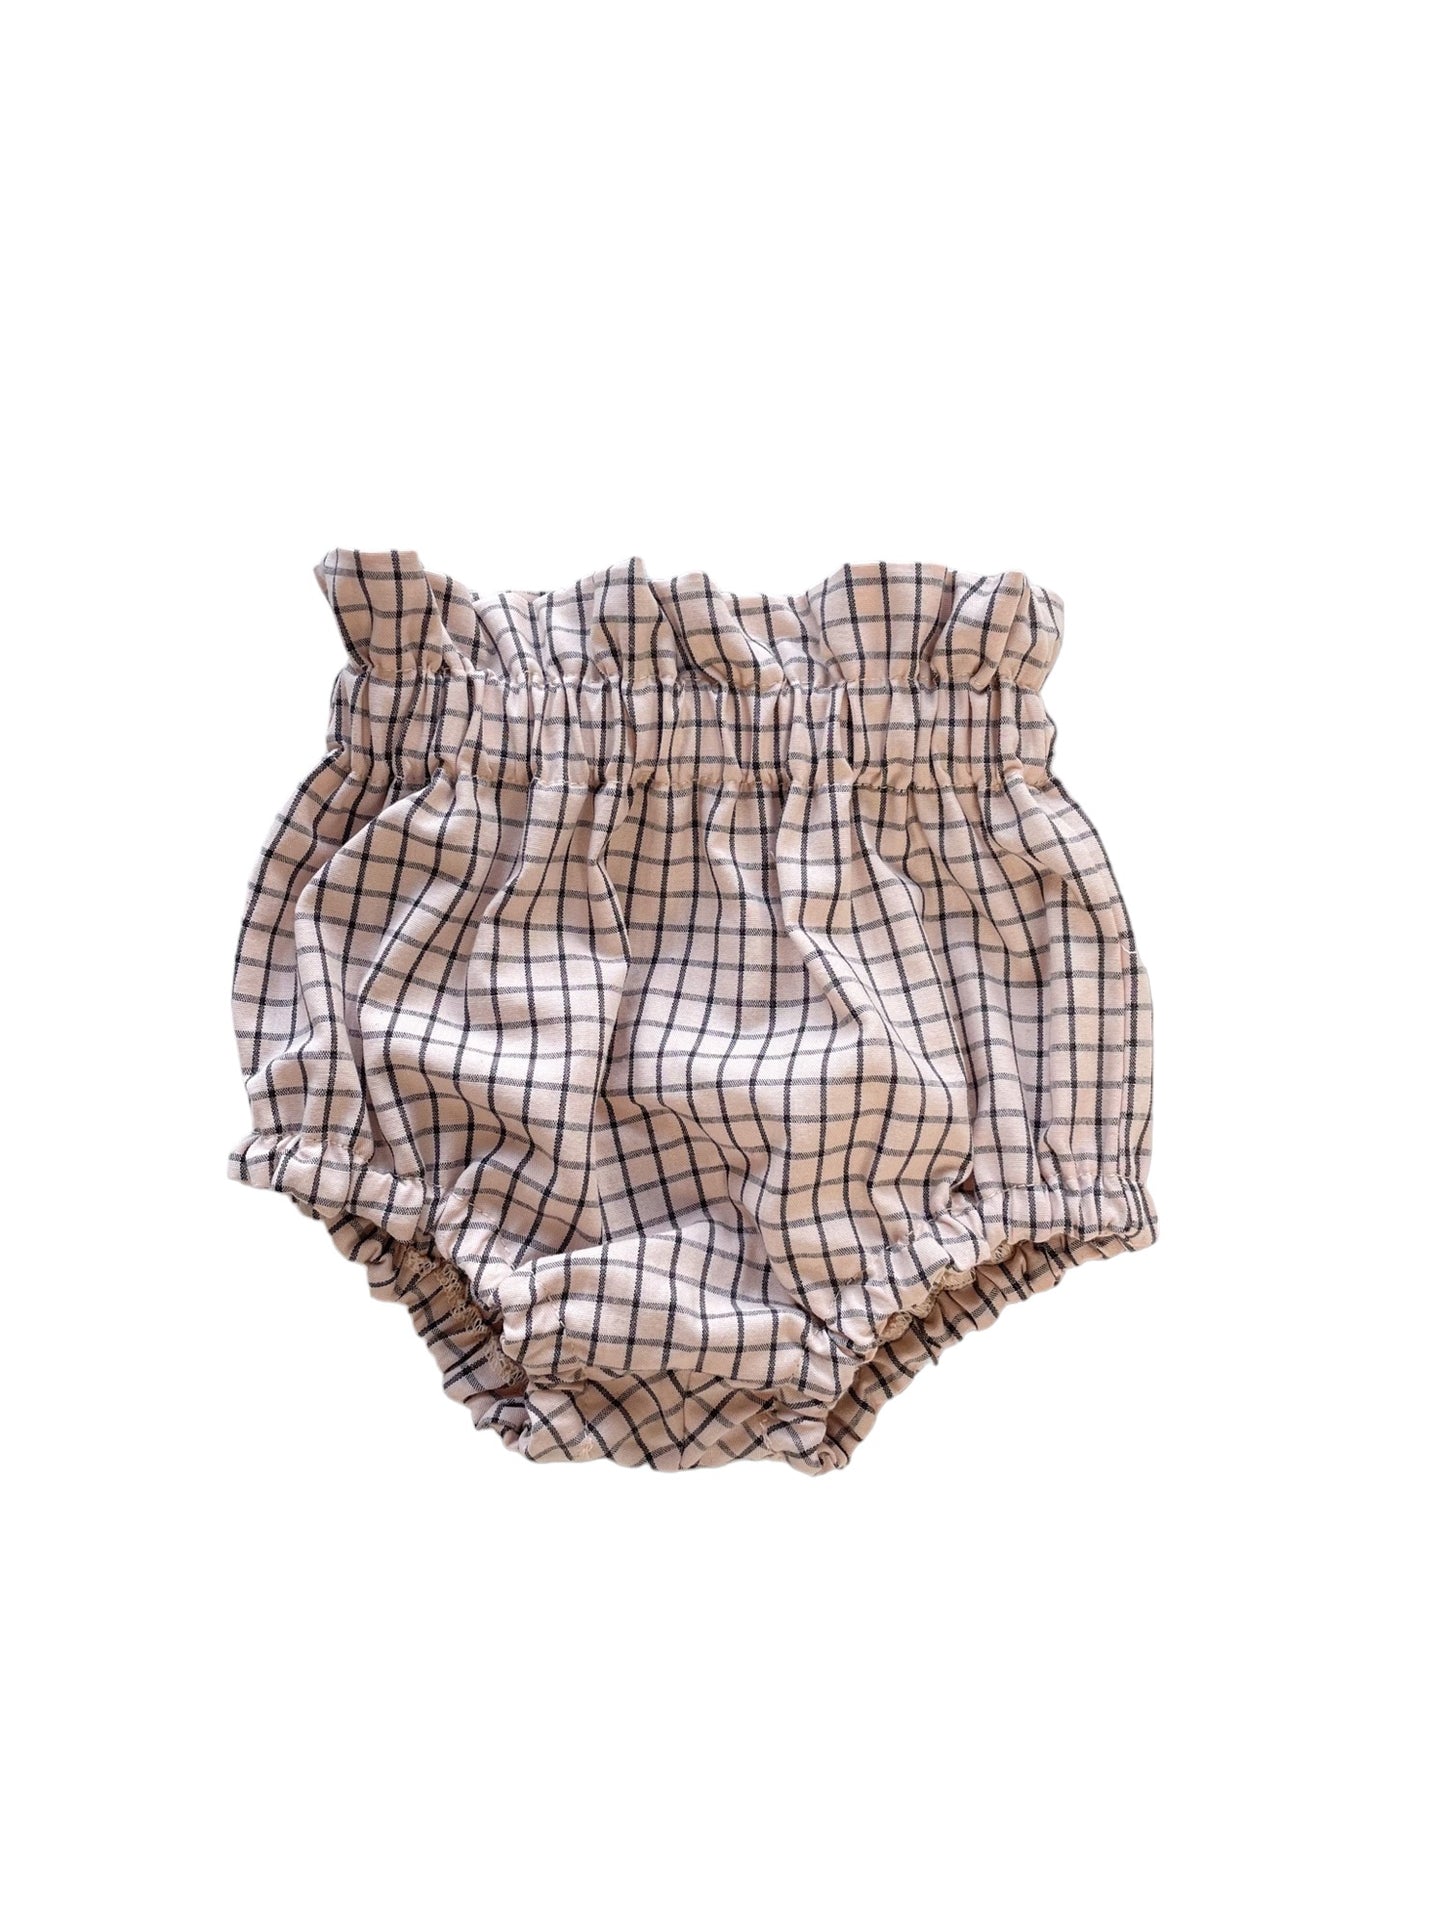 Baby bloomers / checkers - pastel blush